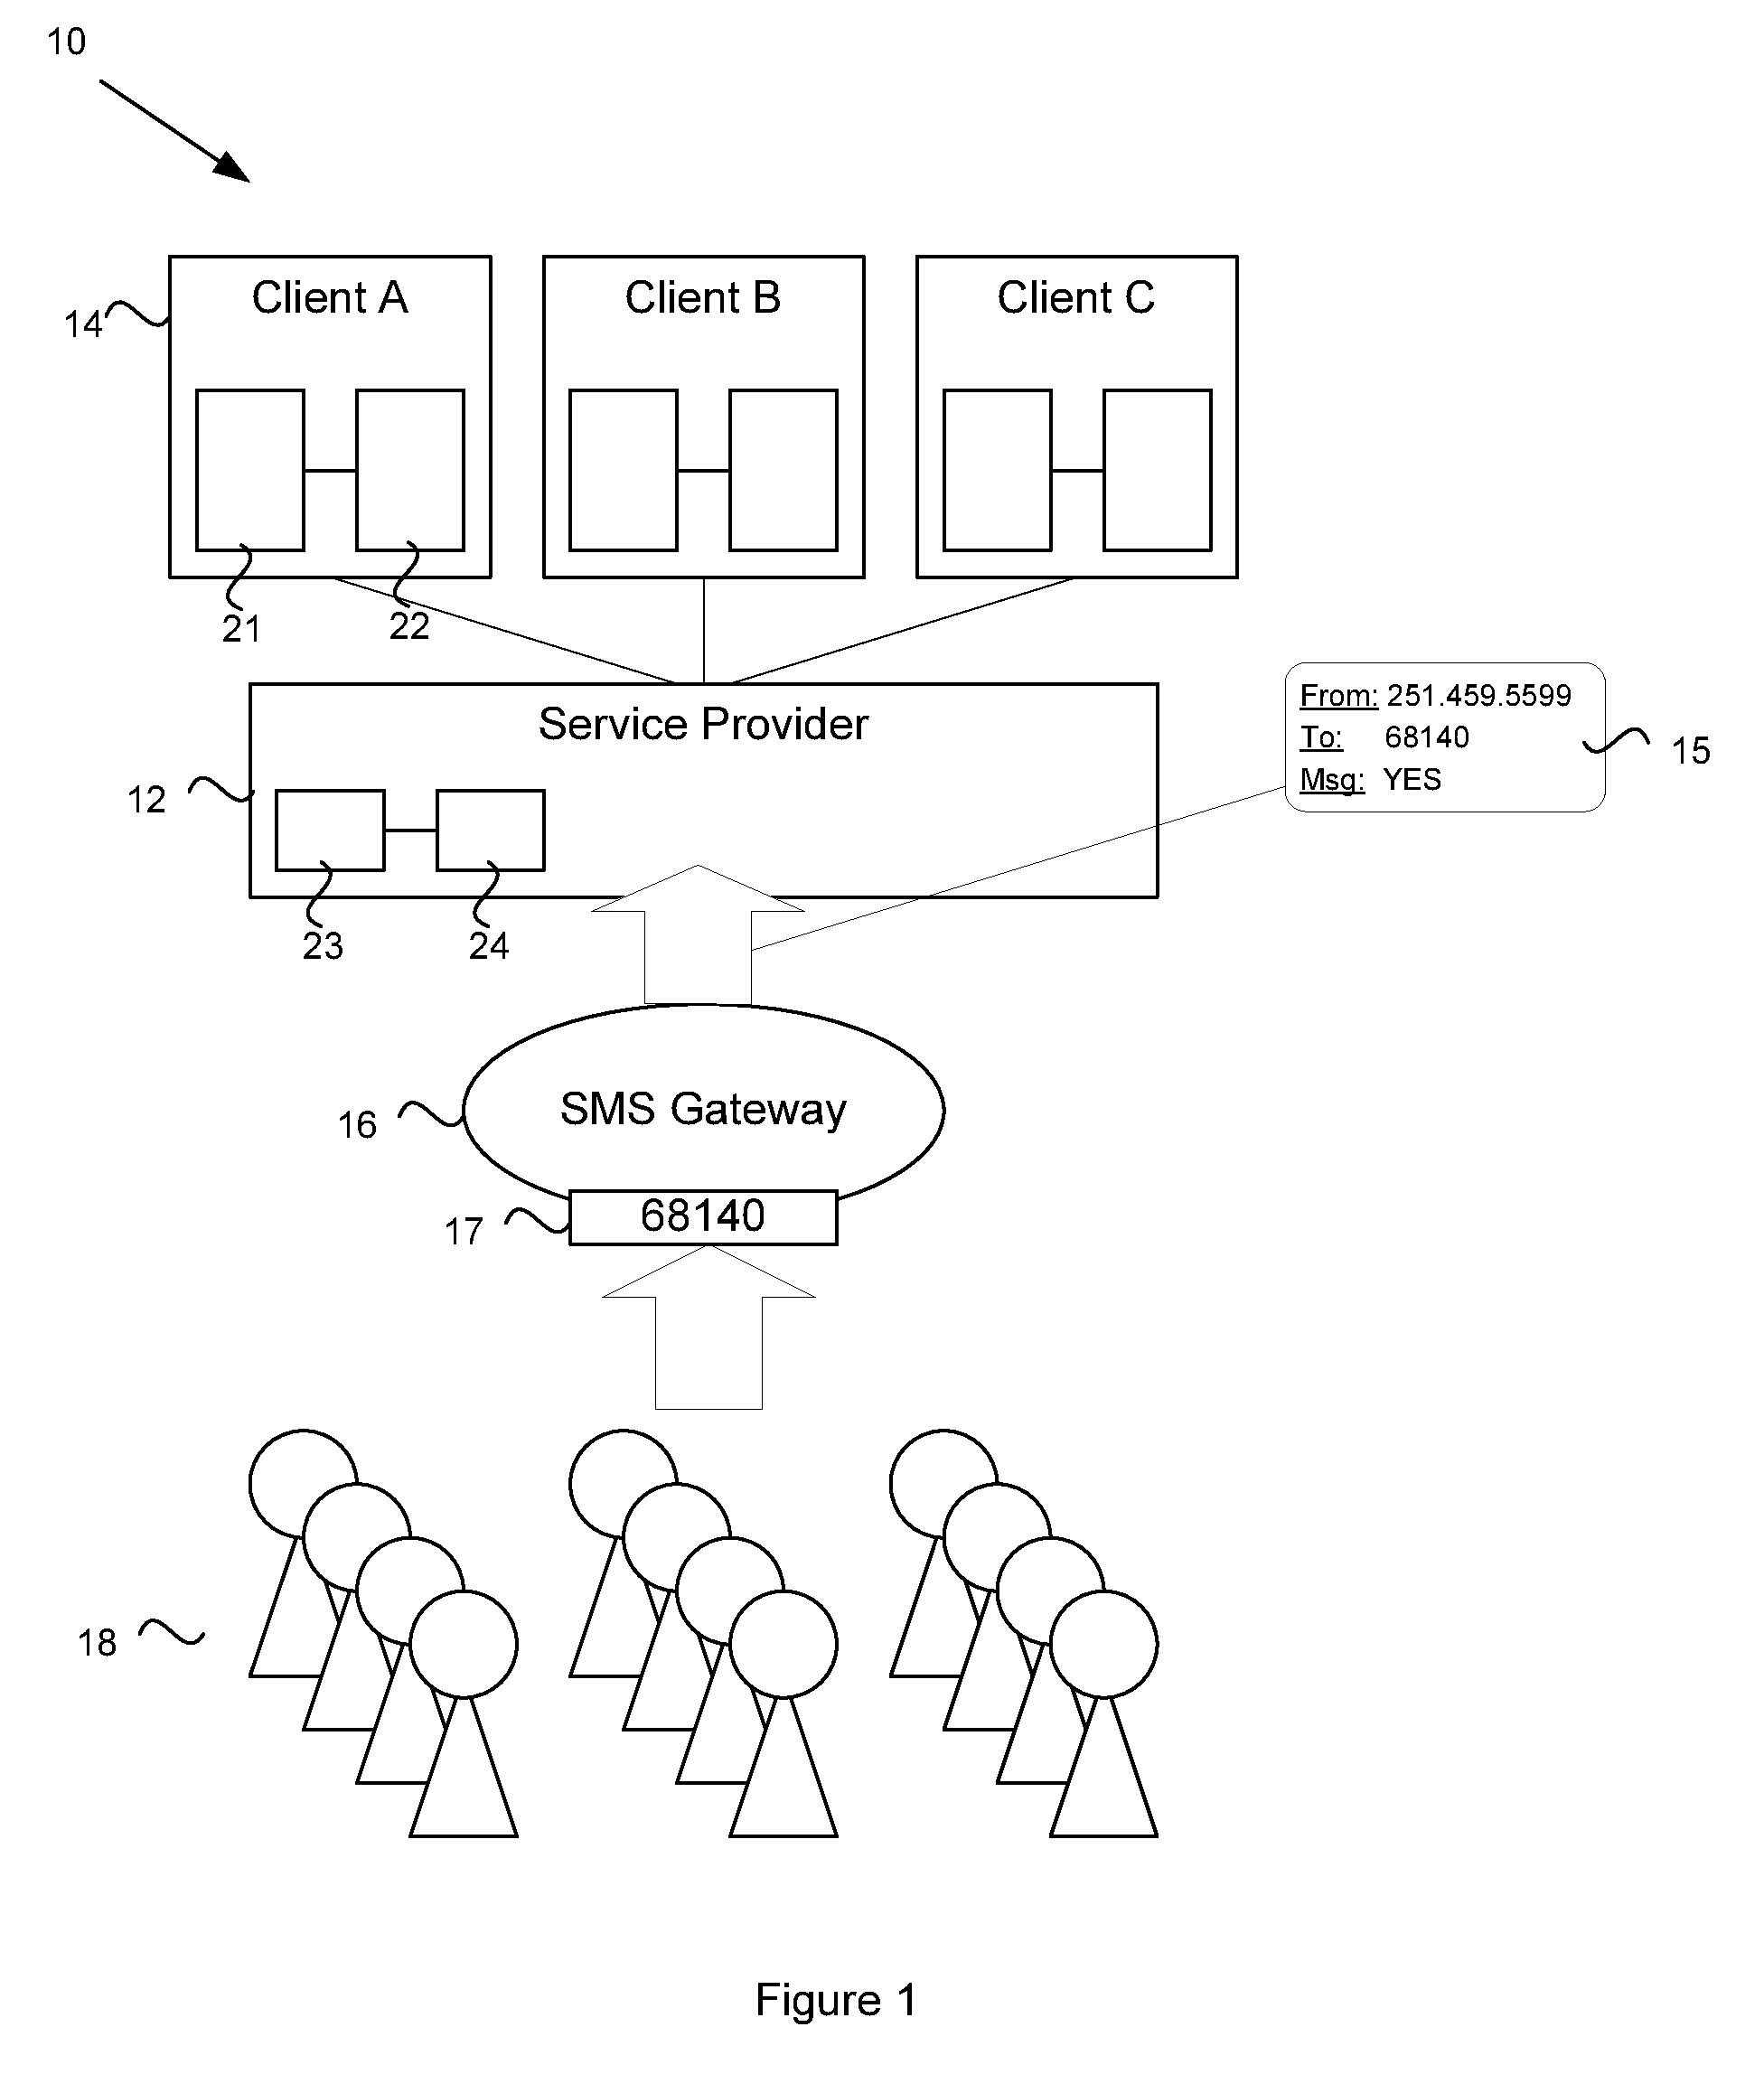 System and method for providing SMS message services from multiple originators using a shared shortcode